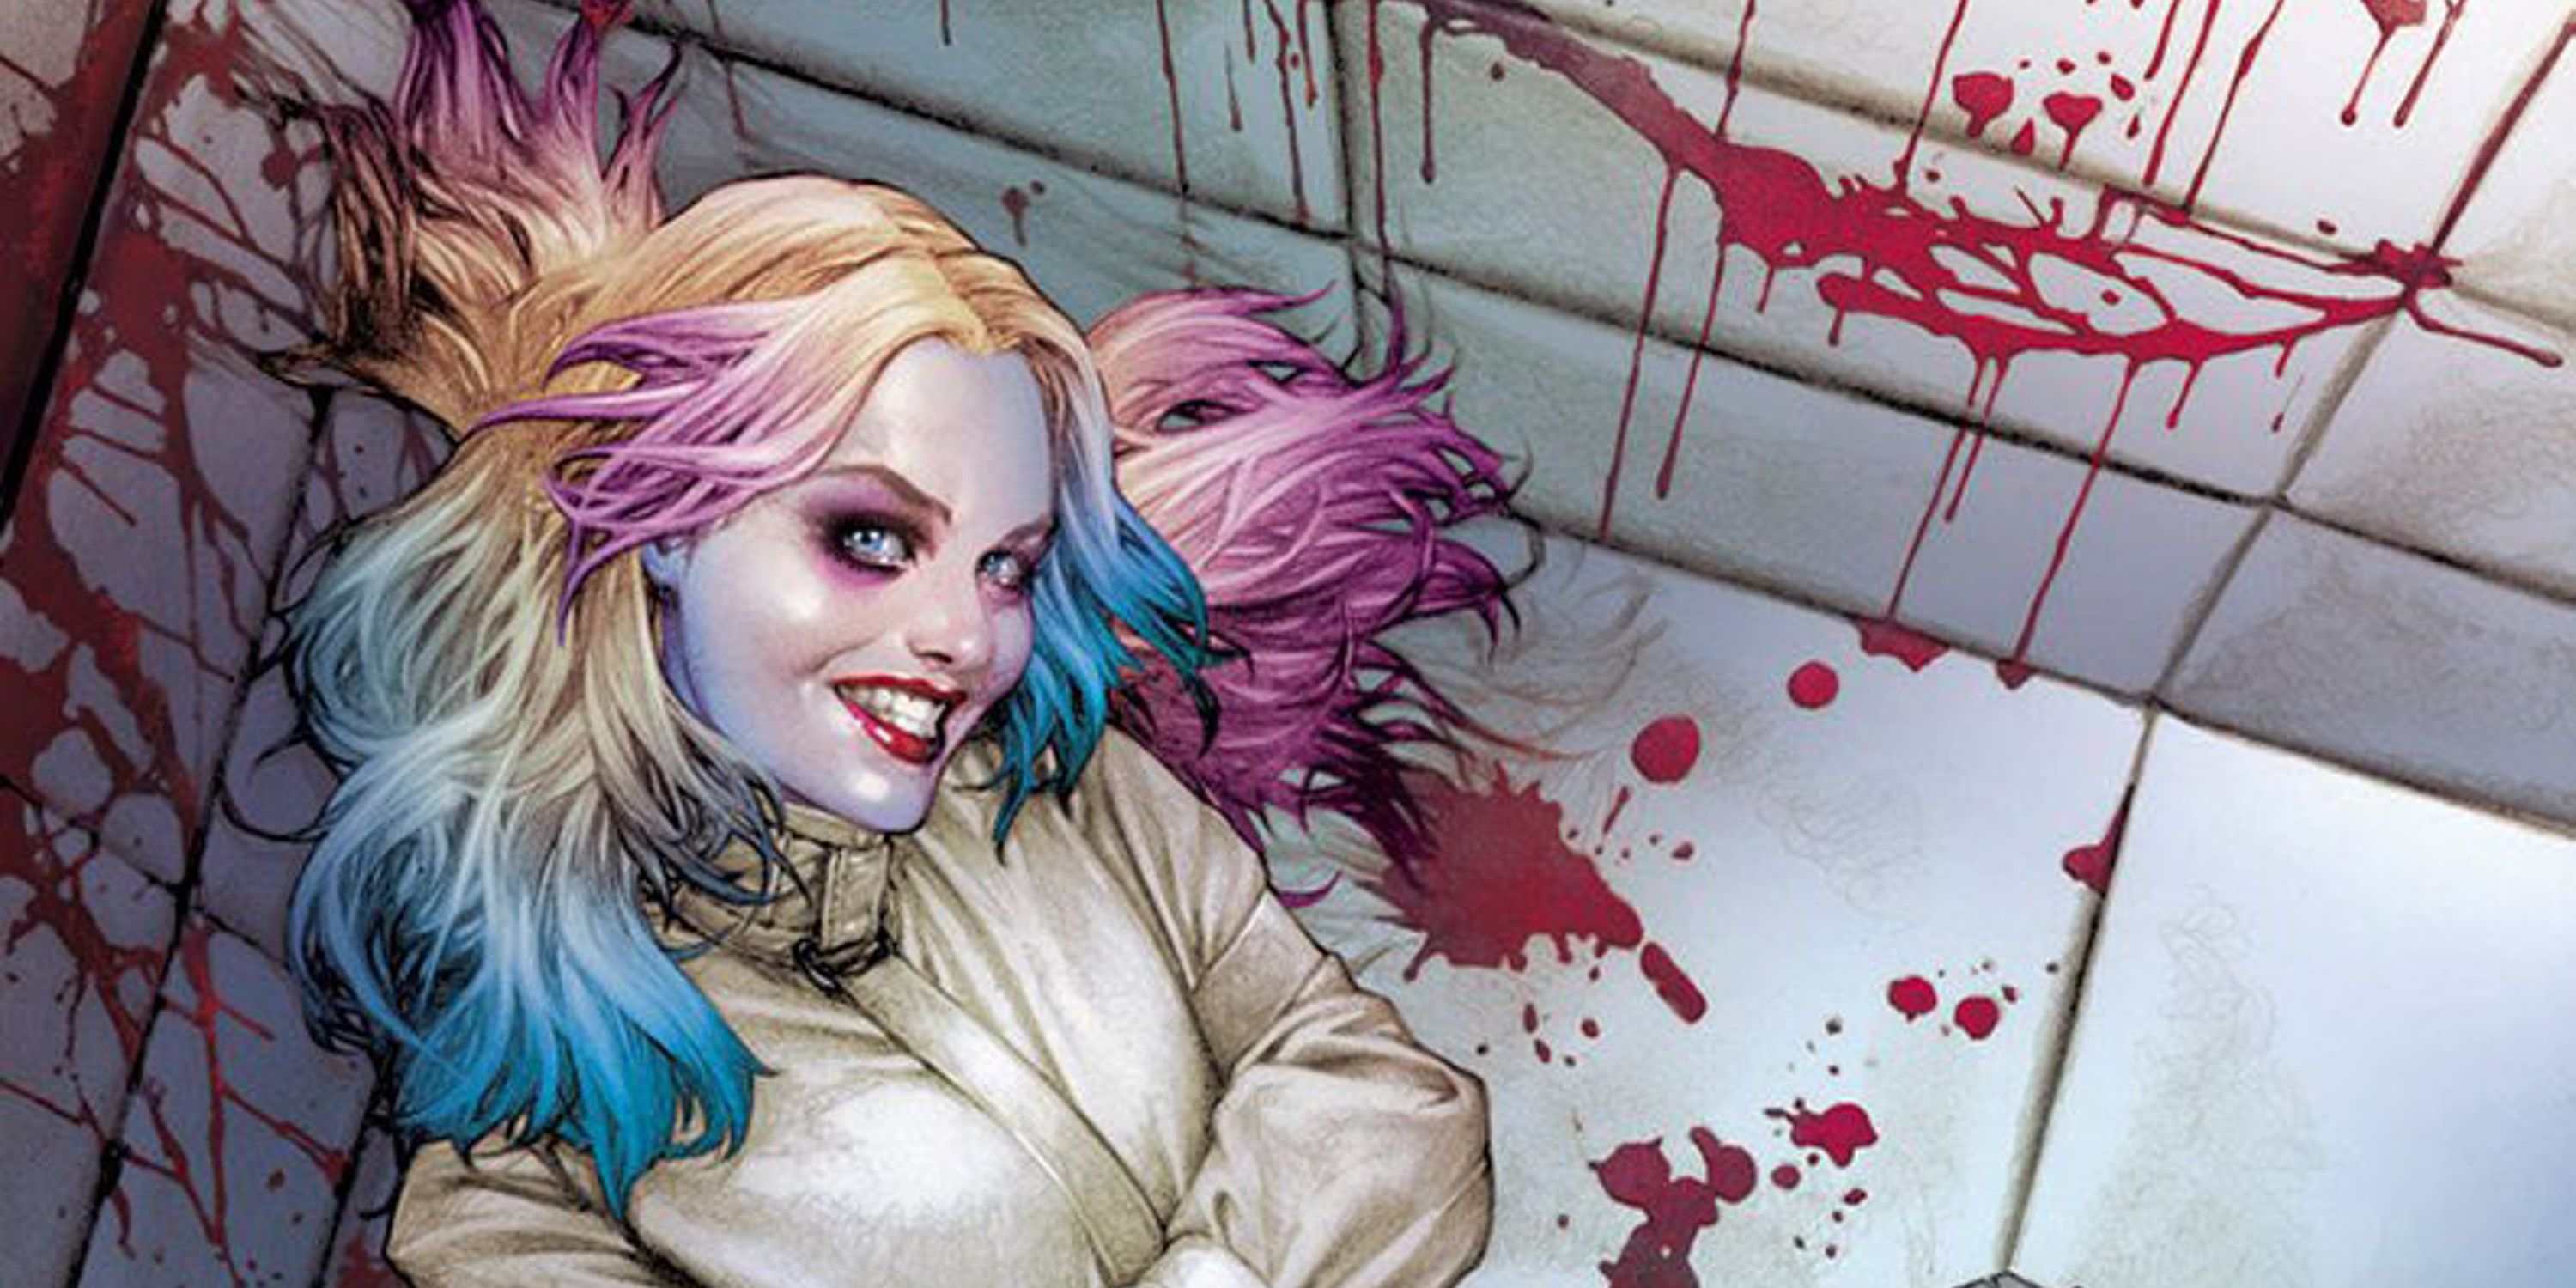 Harley Quinn in a straightjacket with blood on walls DC Comics